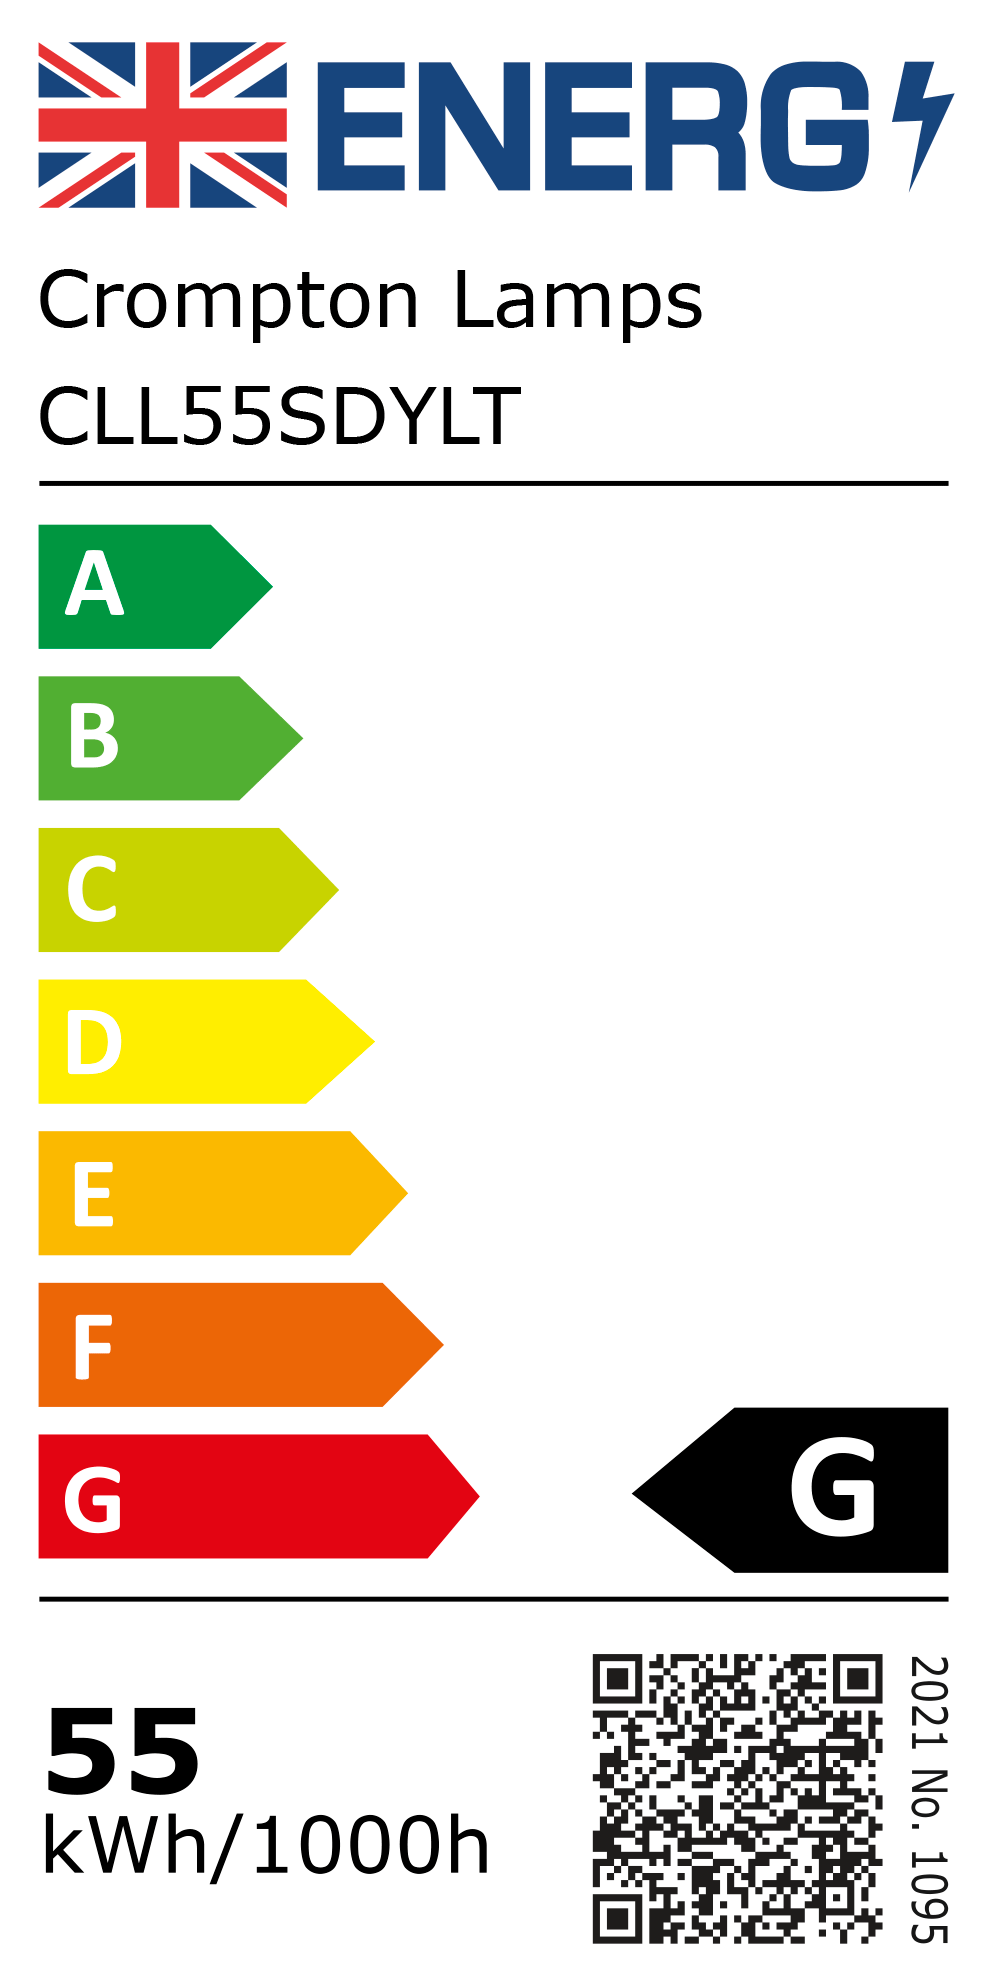 New 2021 Energy Rating Label: MPN CLL55SDYLT